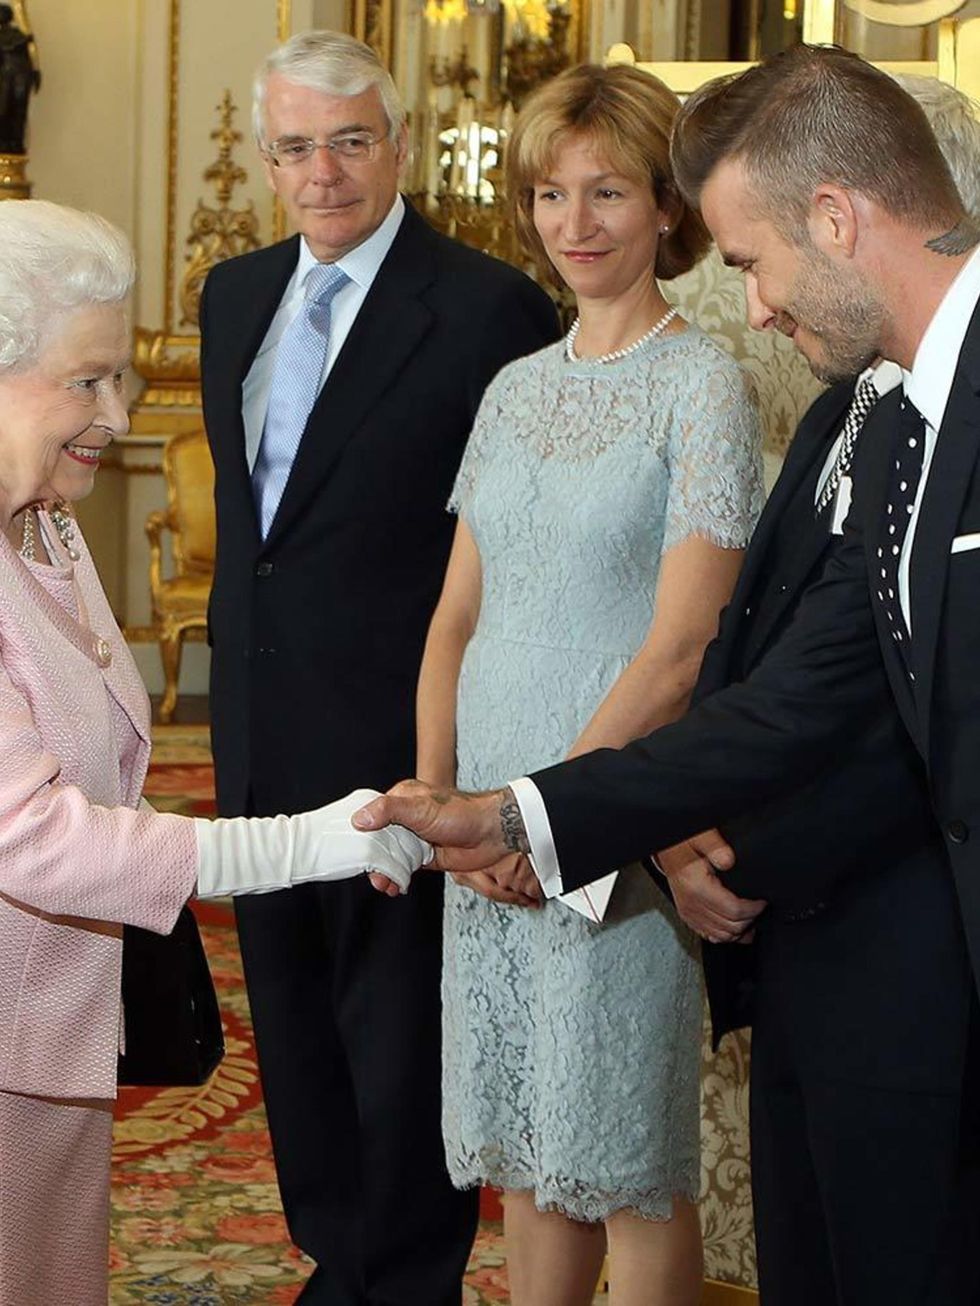 Queen Elizabeth II meets David Beckham at a reception at Buckingham Palace to celebrate The Queen's Young Leaders programme and present awards to the first successful winners of the Commonwealth project, June 2015.